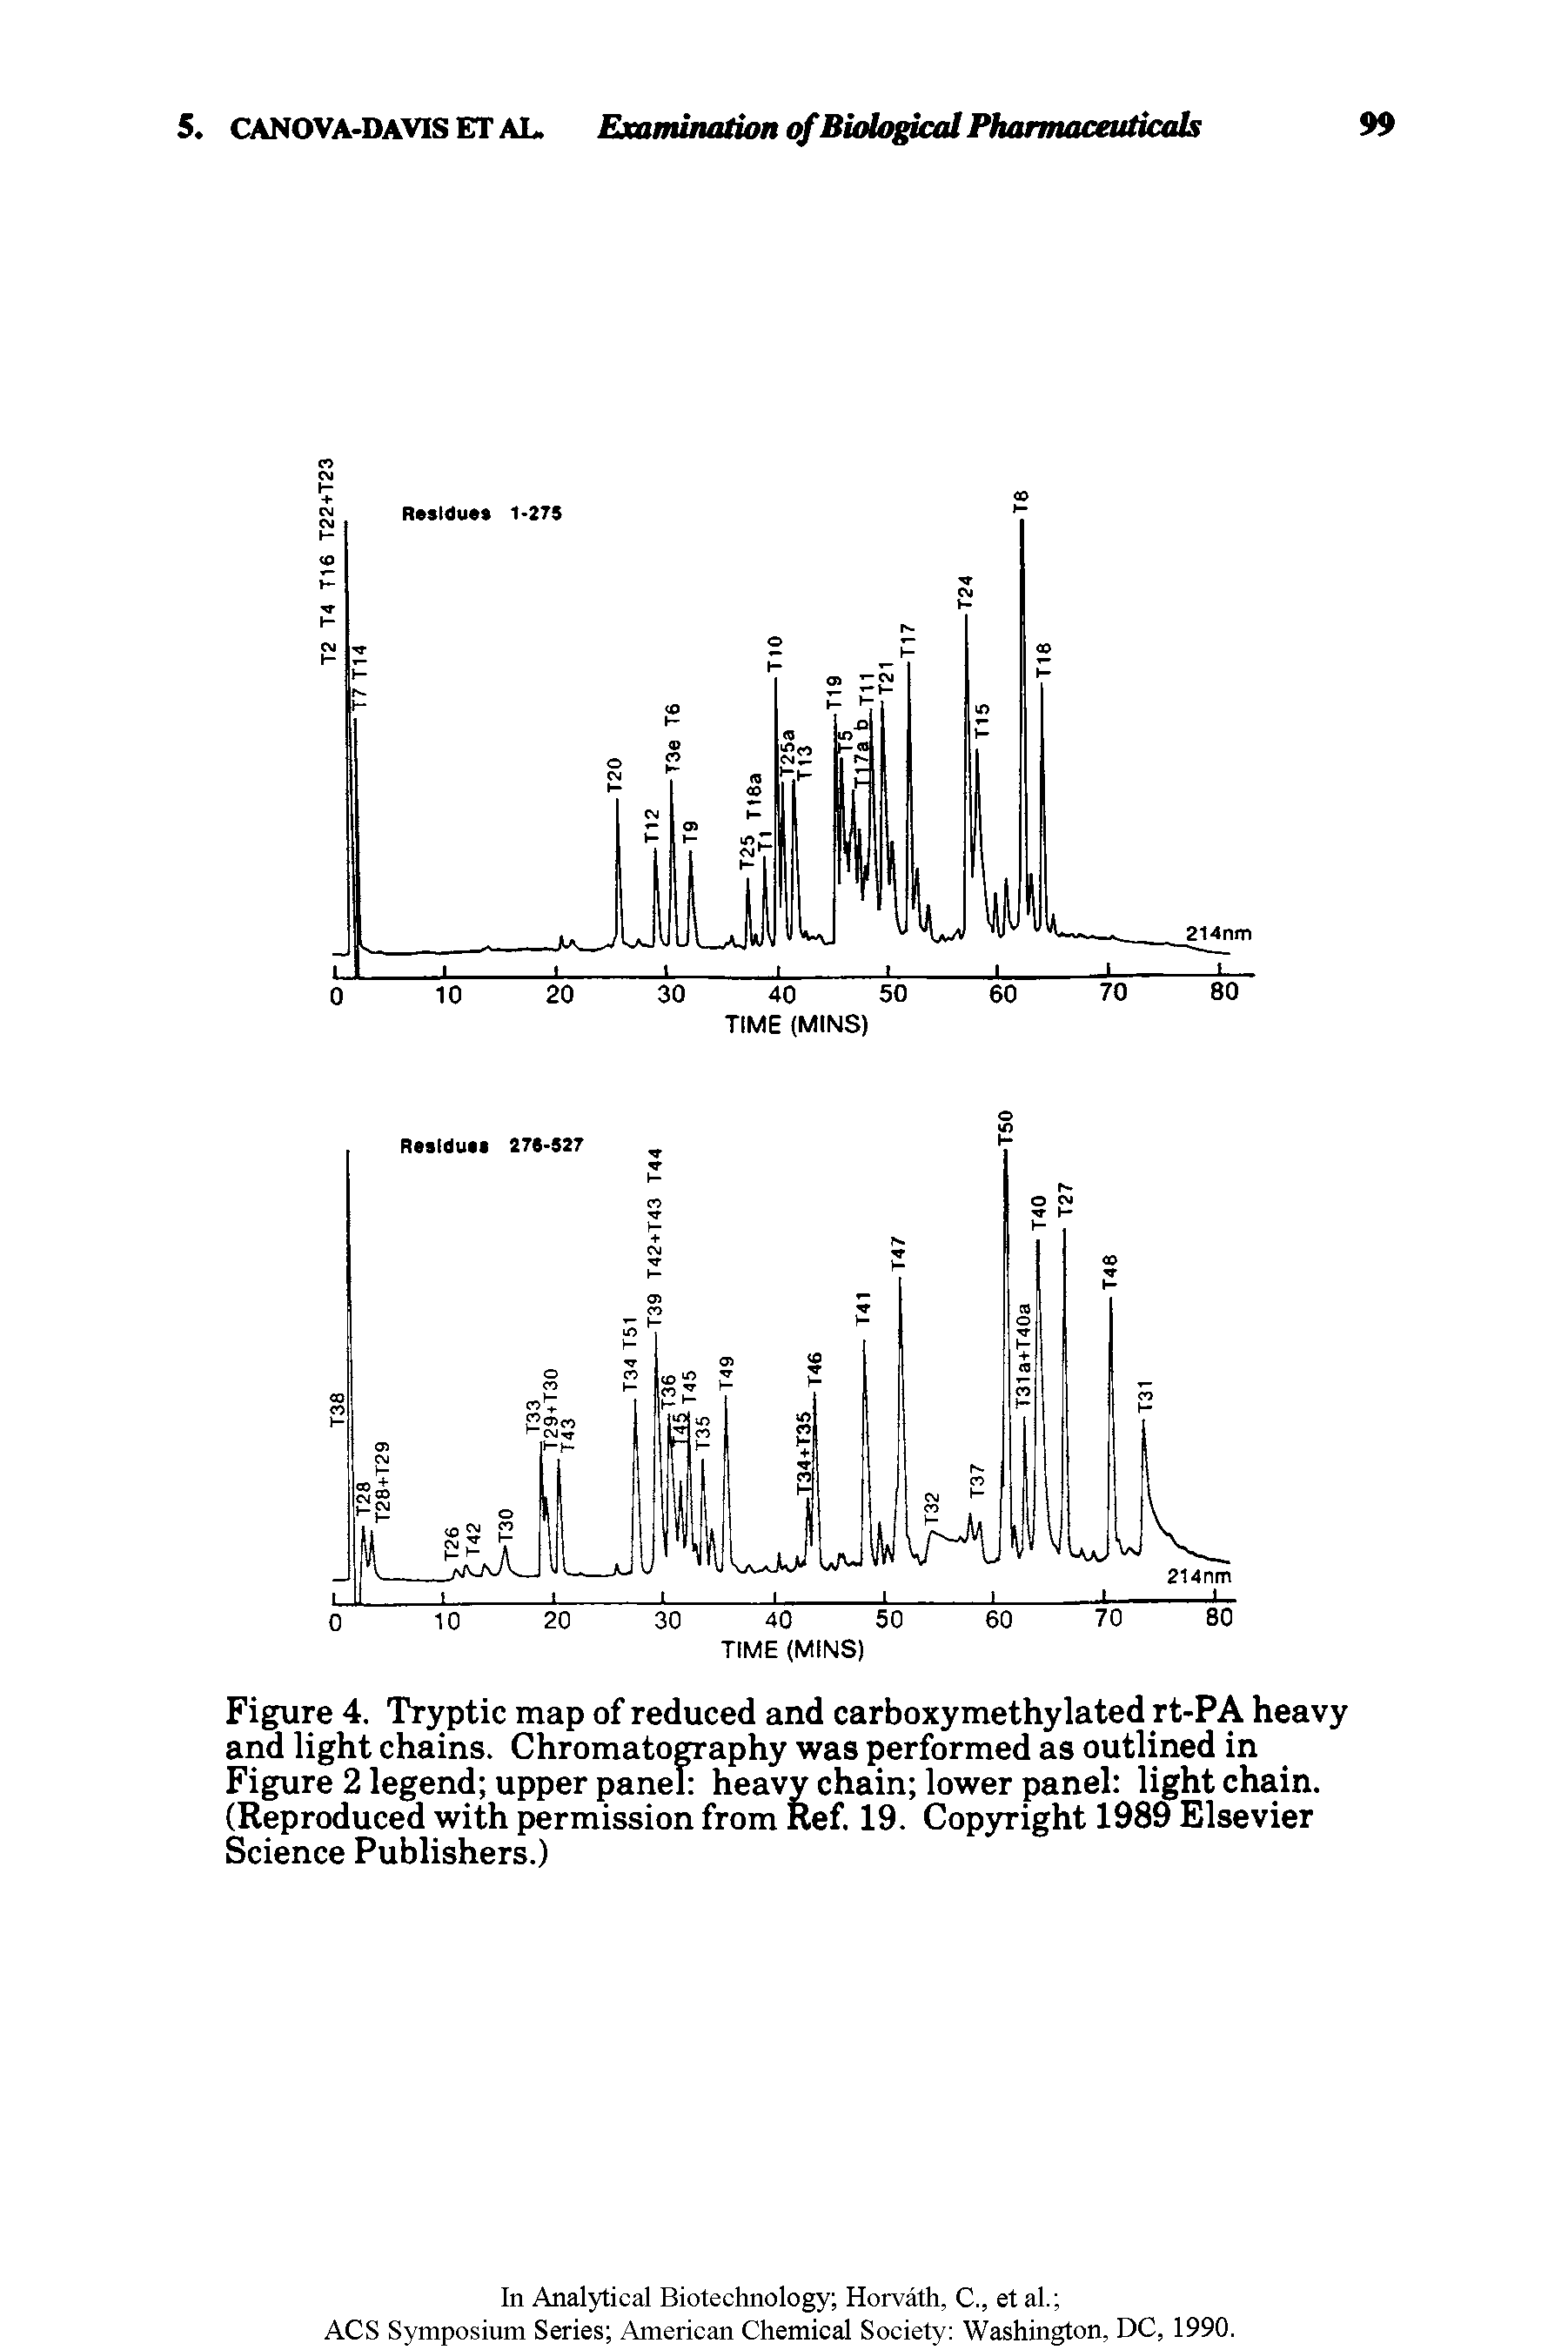 Figure 4. Tryptic map of reduced and carboxymethylated rt-PA heavy and light chains. Chromatography was performed as outlined in Figure 2 legend upper panel heavy chain lower panel light chain. (Reproduced with permission from Ref. 19. Copyright 1989 Elsevier Science Publishers.)...